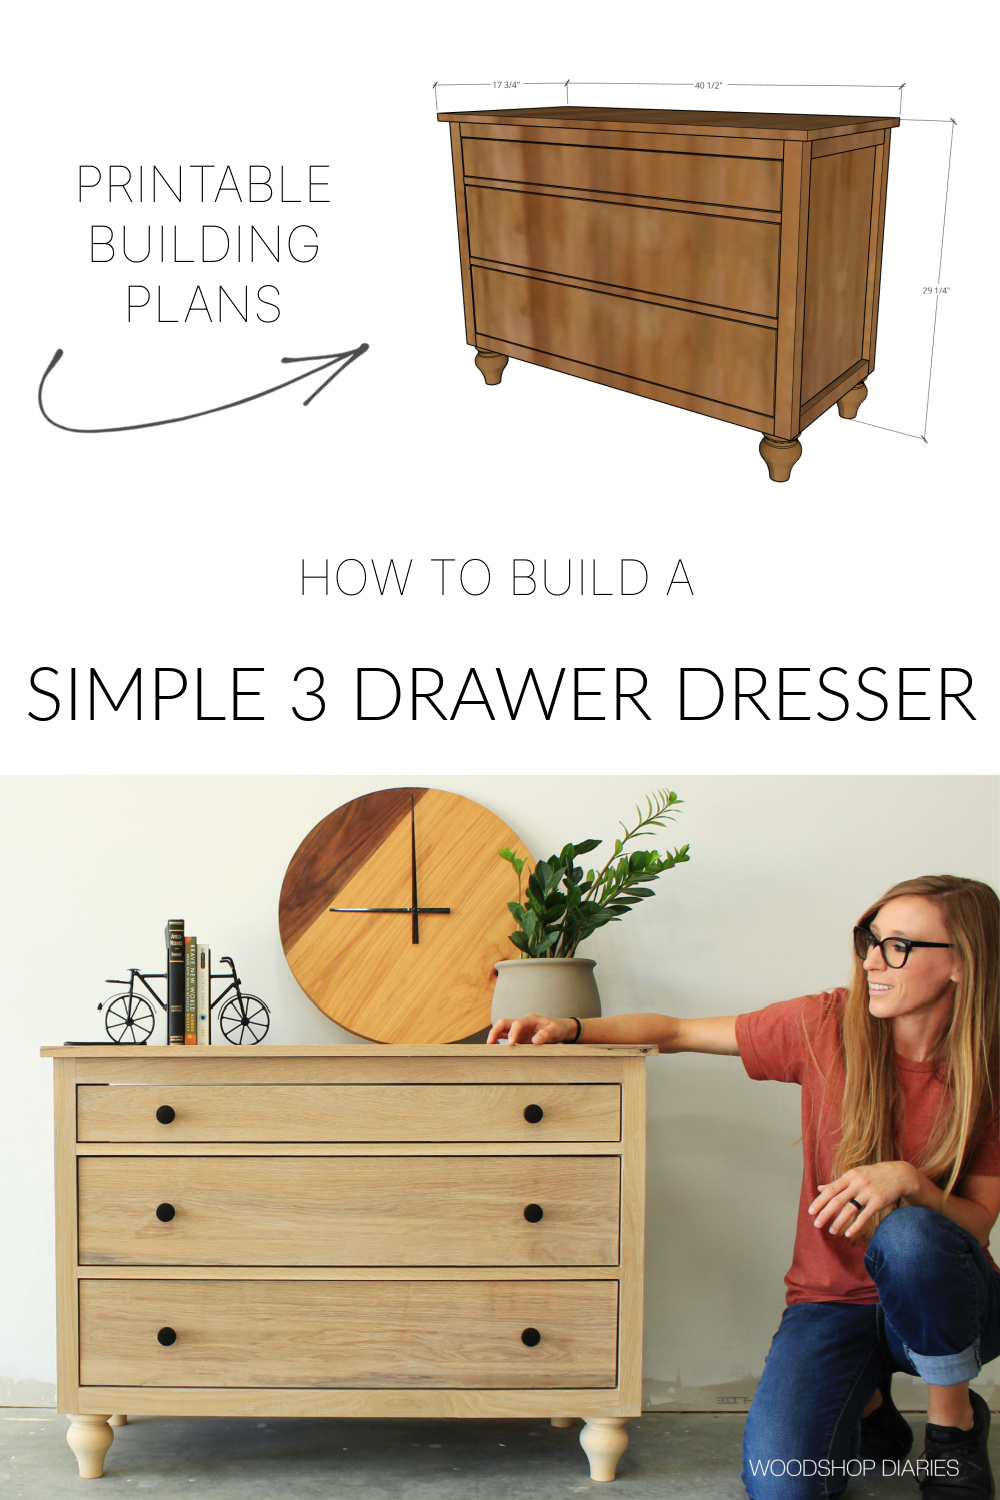 Pinterest collage showing overall dimensional diagram at top and Shara with white oak DIY dresser build at bottom with text "how to build a simple 3 drawer dresser"